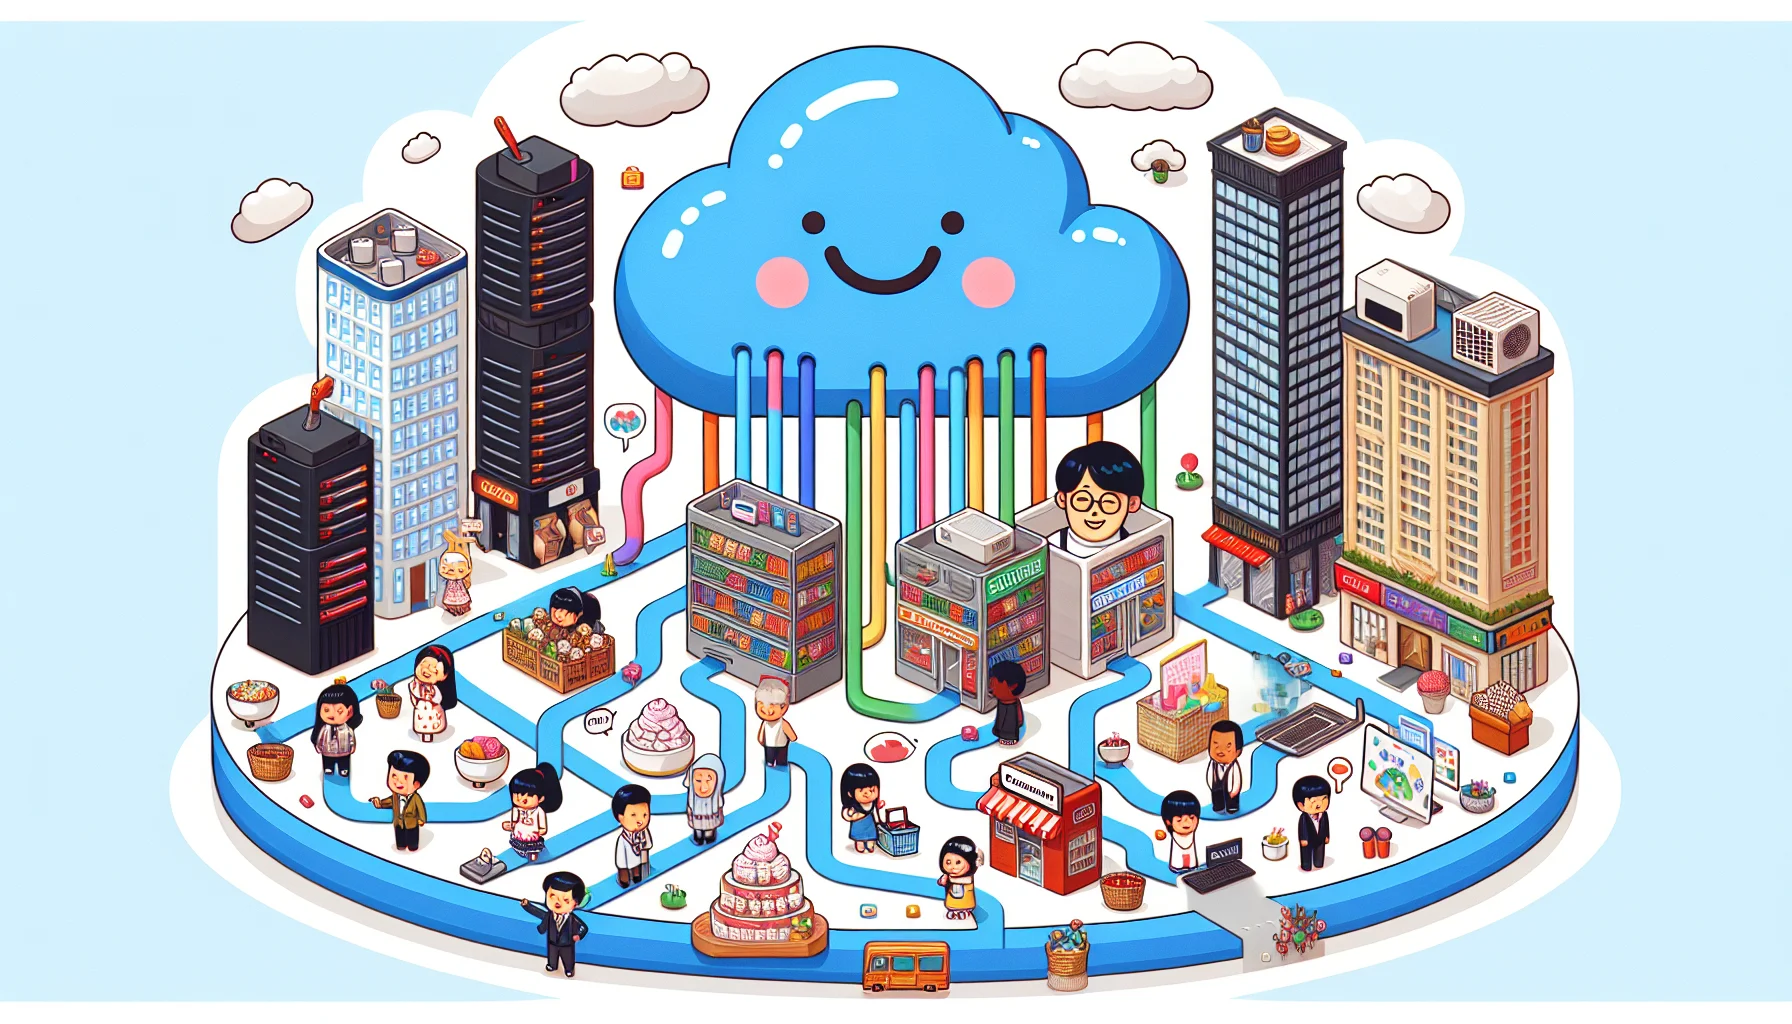 An amusing and playful representation of cloud hosting for small businesses. Picture a scene set in a bustling city where buildings are servers and the clouds are a gigantic cloud storage, providing data and resources with various colorful pathways connecting to a diverse range of businesses - A Korean male confectioner with a creative website, a Middle-Eastern female clothing merchandiser with a full-fledged e-commerce portal, a Hispanic youthful video game designer with an interactive webpage. The cloud storage seems to radiate a friendly aura, enticing more businesses to join in.